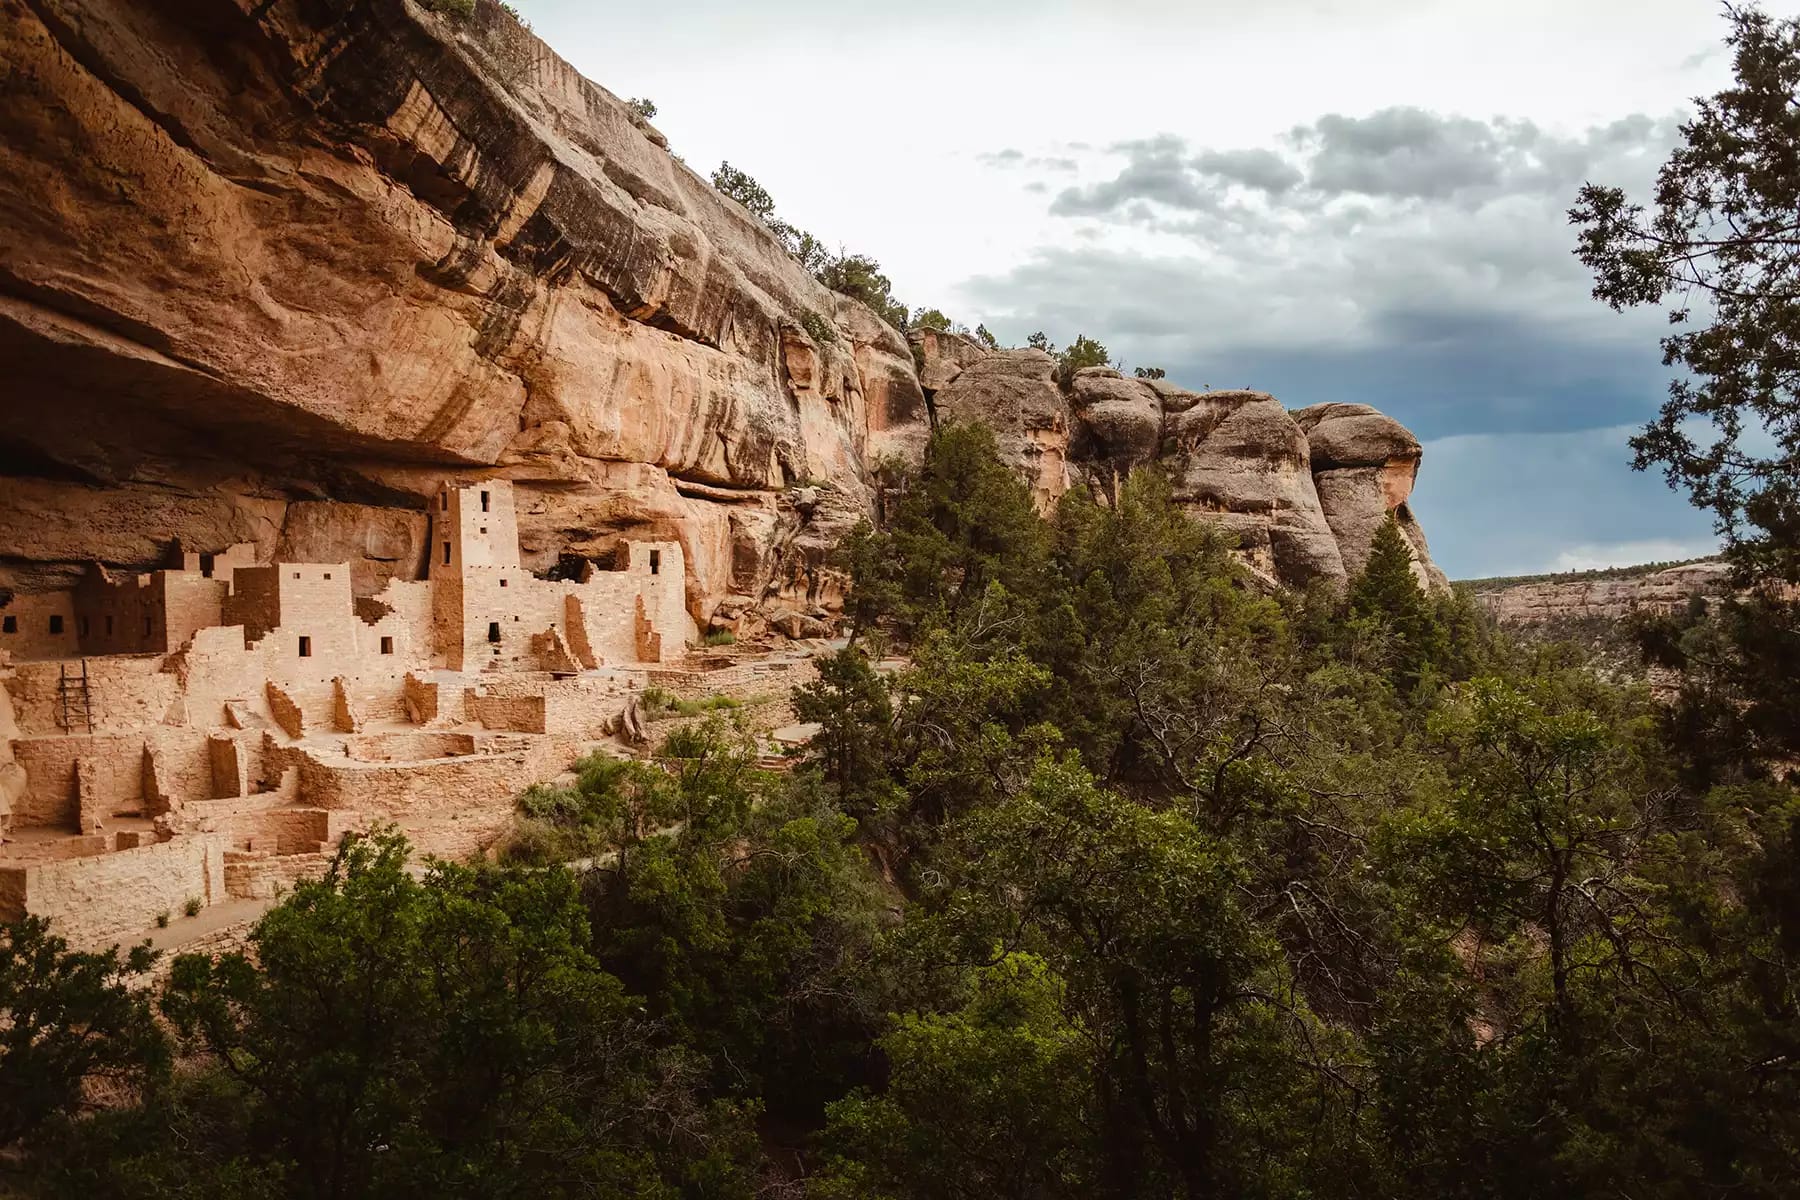 A view of ancient cliff dwellings in Mesa Verde National Park, one of the best places to visit when you travel to Colorado.